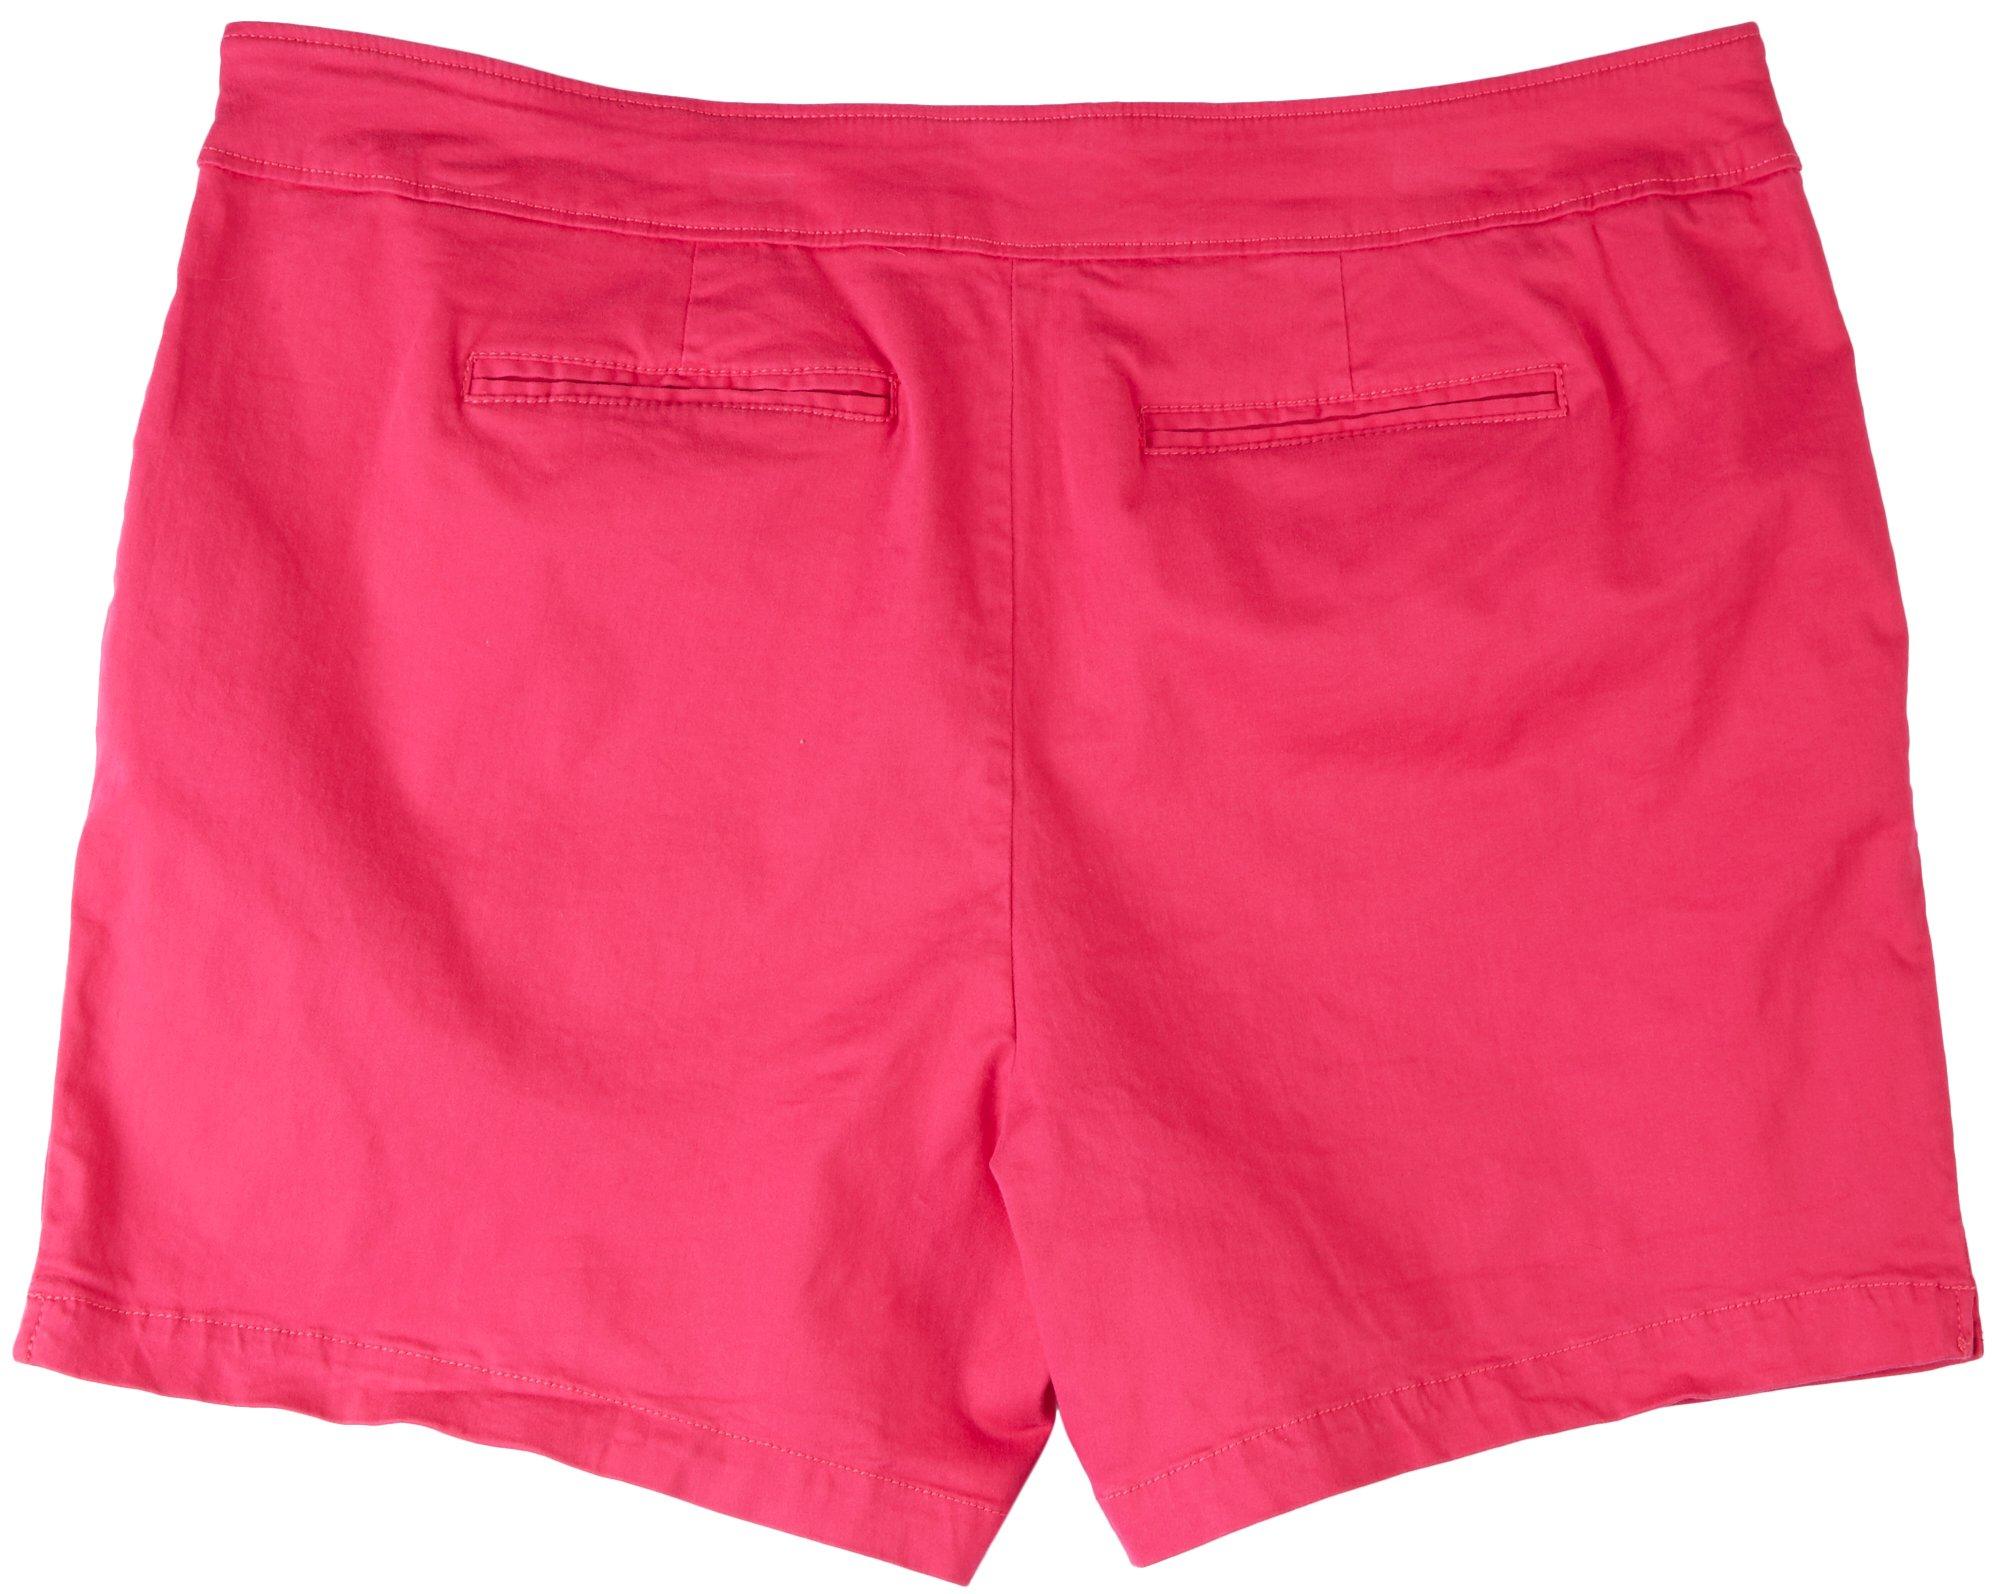 Recreation Plus Solid Casual Shorts | eBay